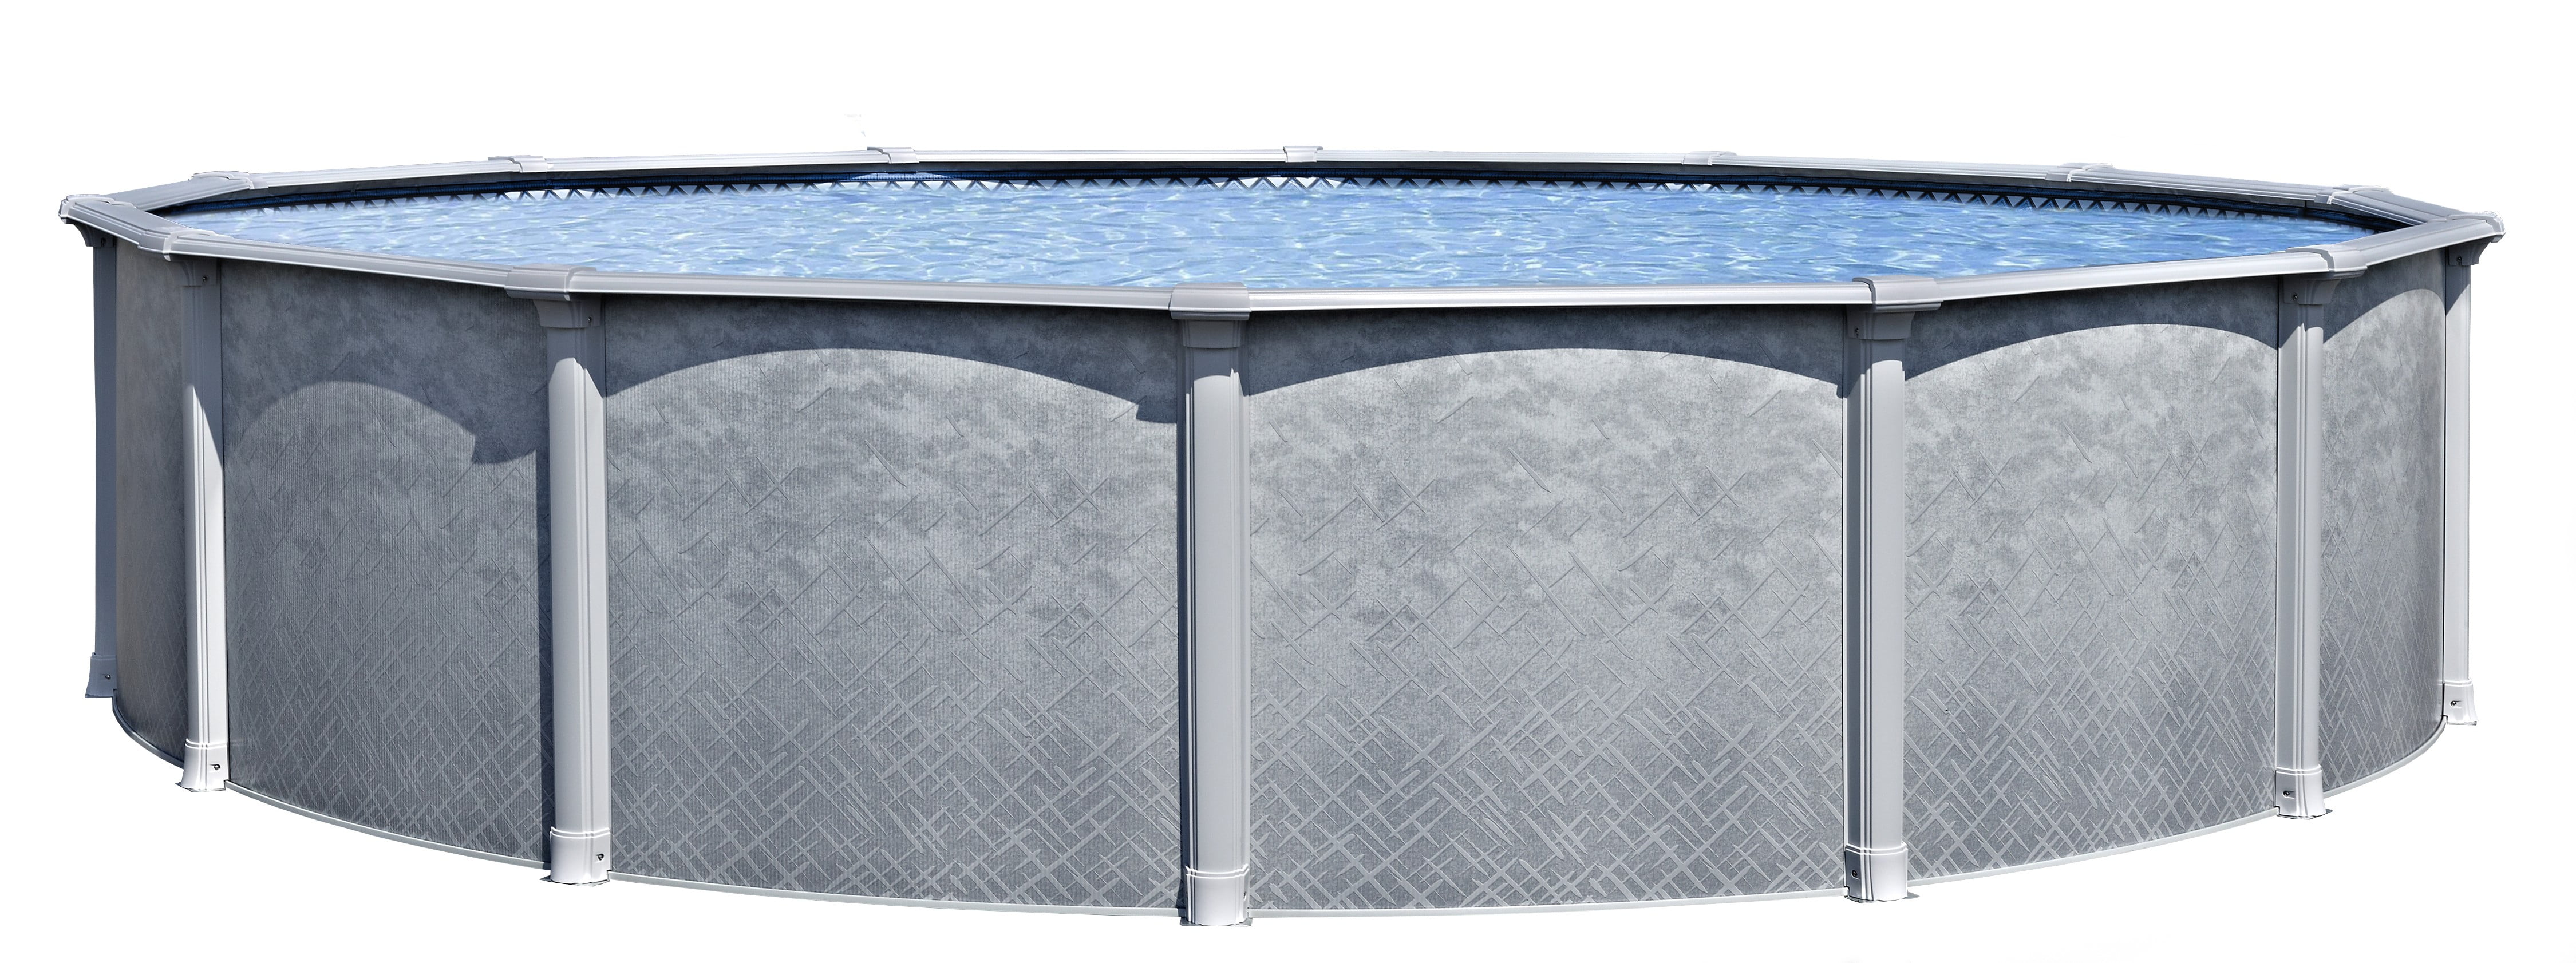 Lifestyle 54" Wall Above Ground Swimming Pool w/ Liner & Skimmer 